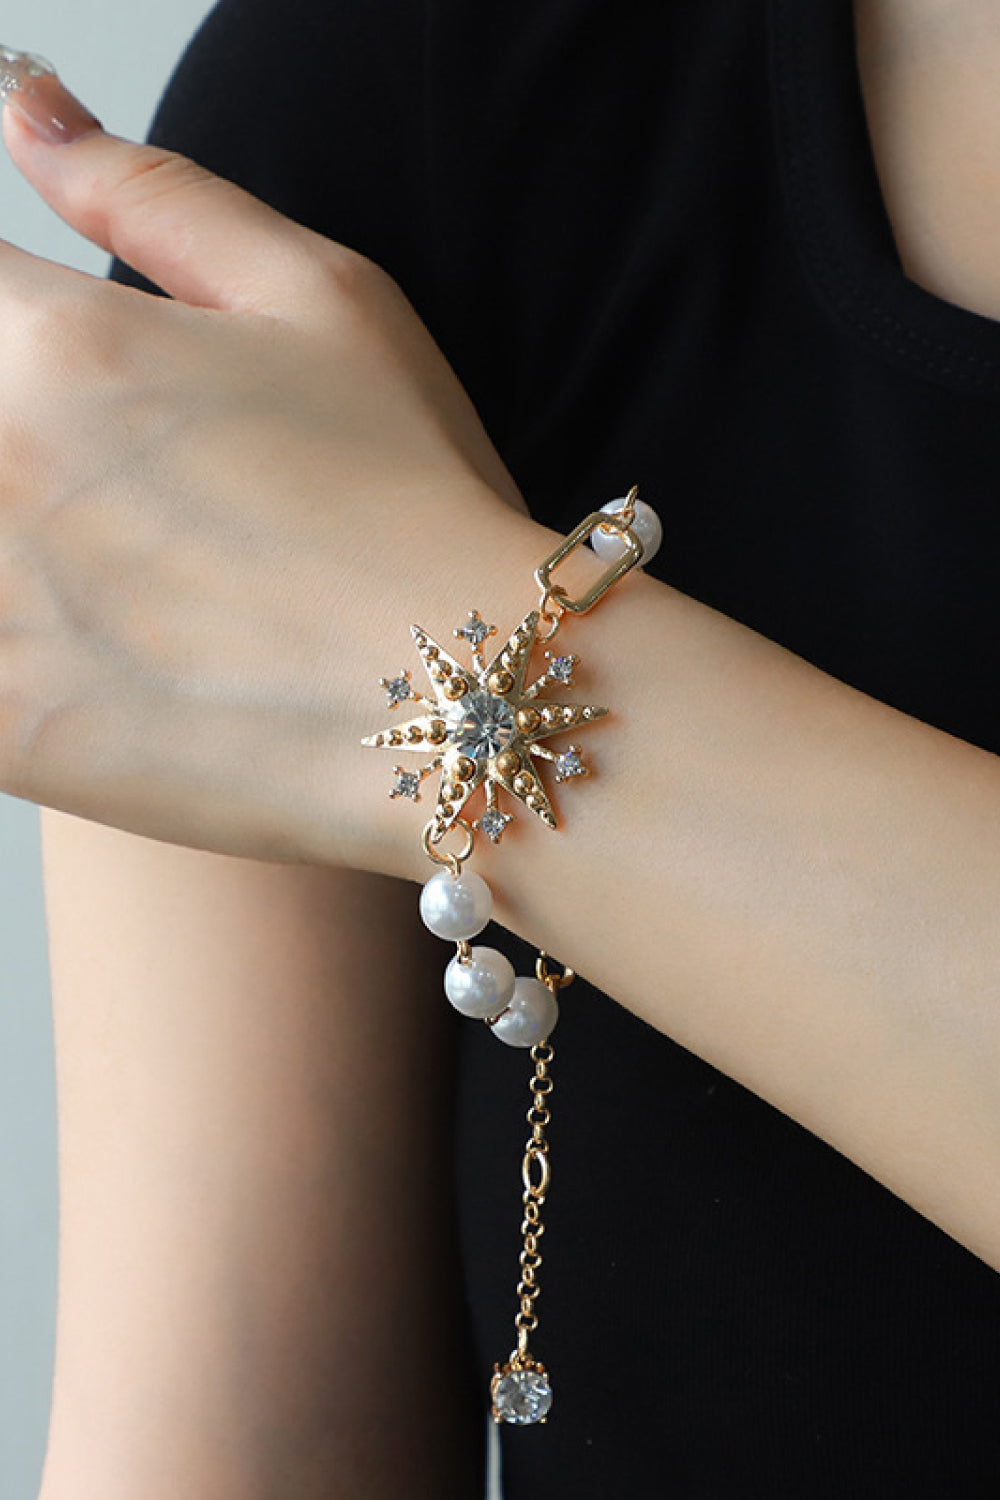 Synthetic Pearl Star Shape Alloy Bracelet - Tophatter Deals and Online Shopping - Electronics, Jewelry, Beauty, Health, Gadgets, Fashion - Tophatter's Discounts & Offers - tophatters - tophatters.co